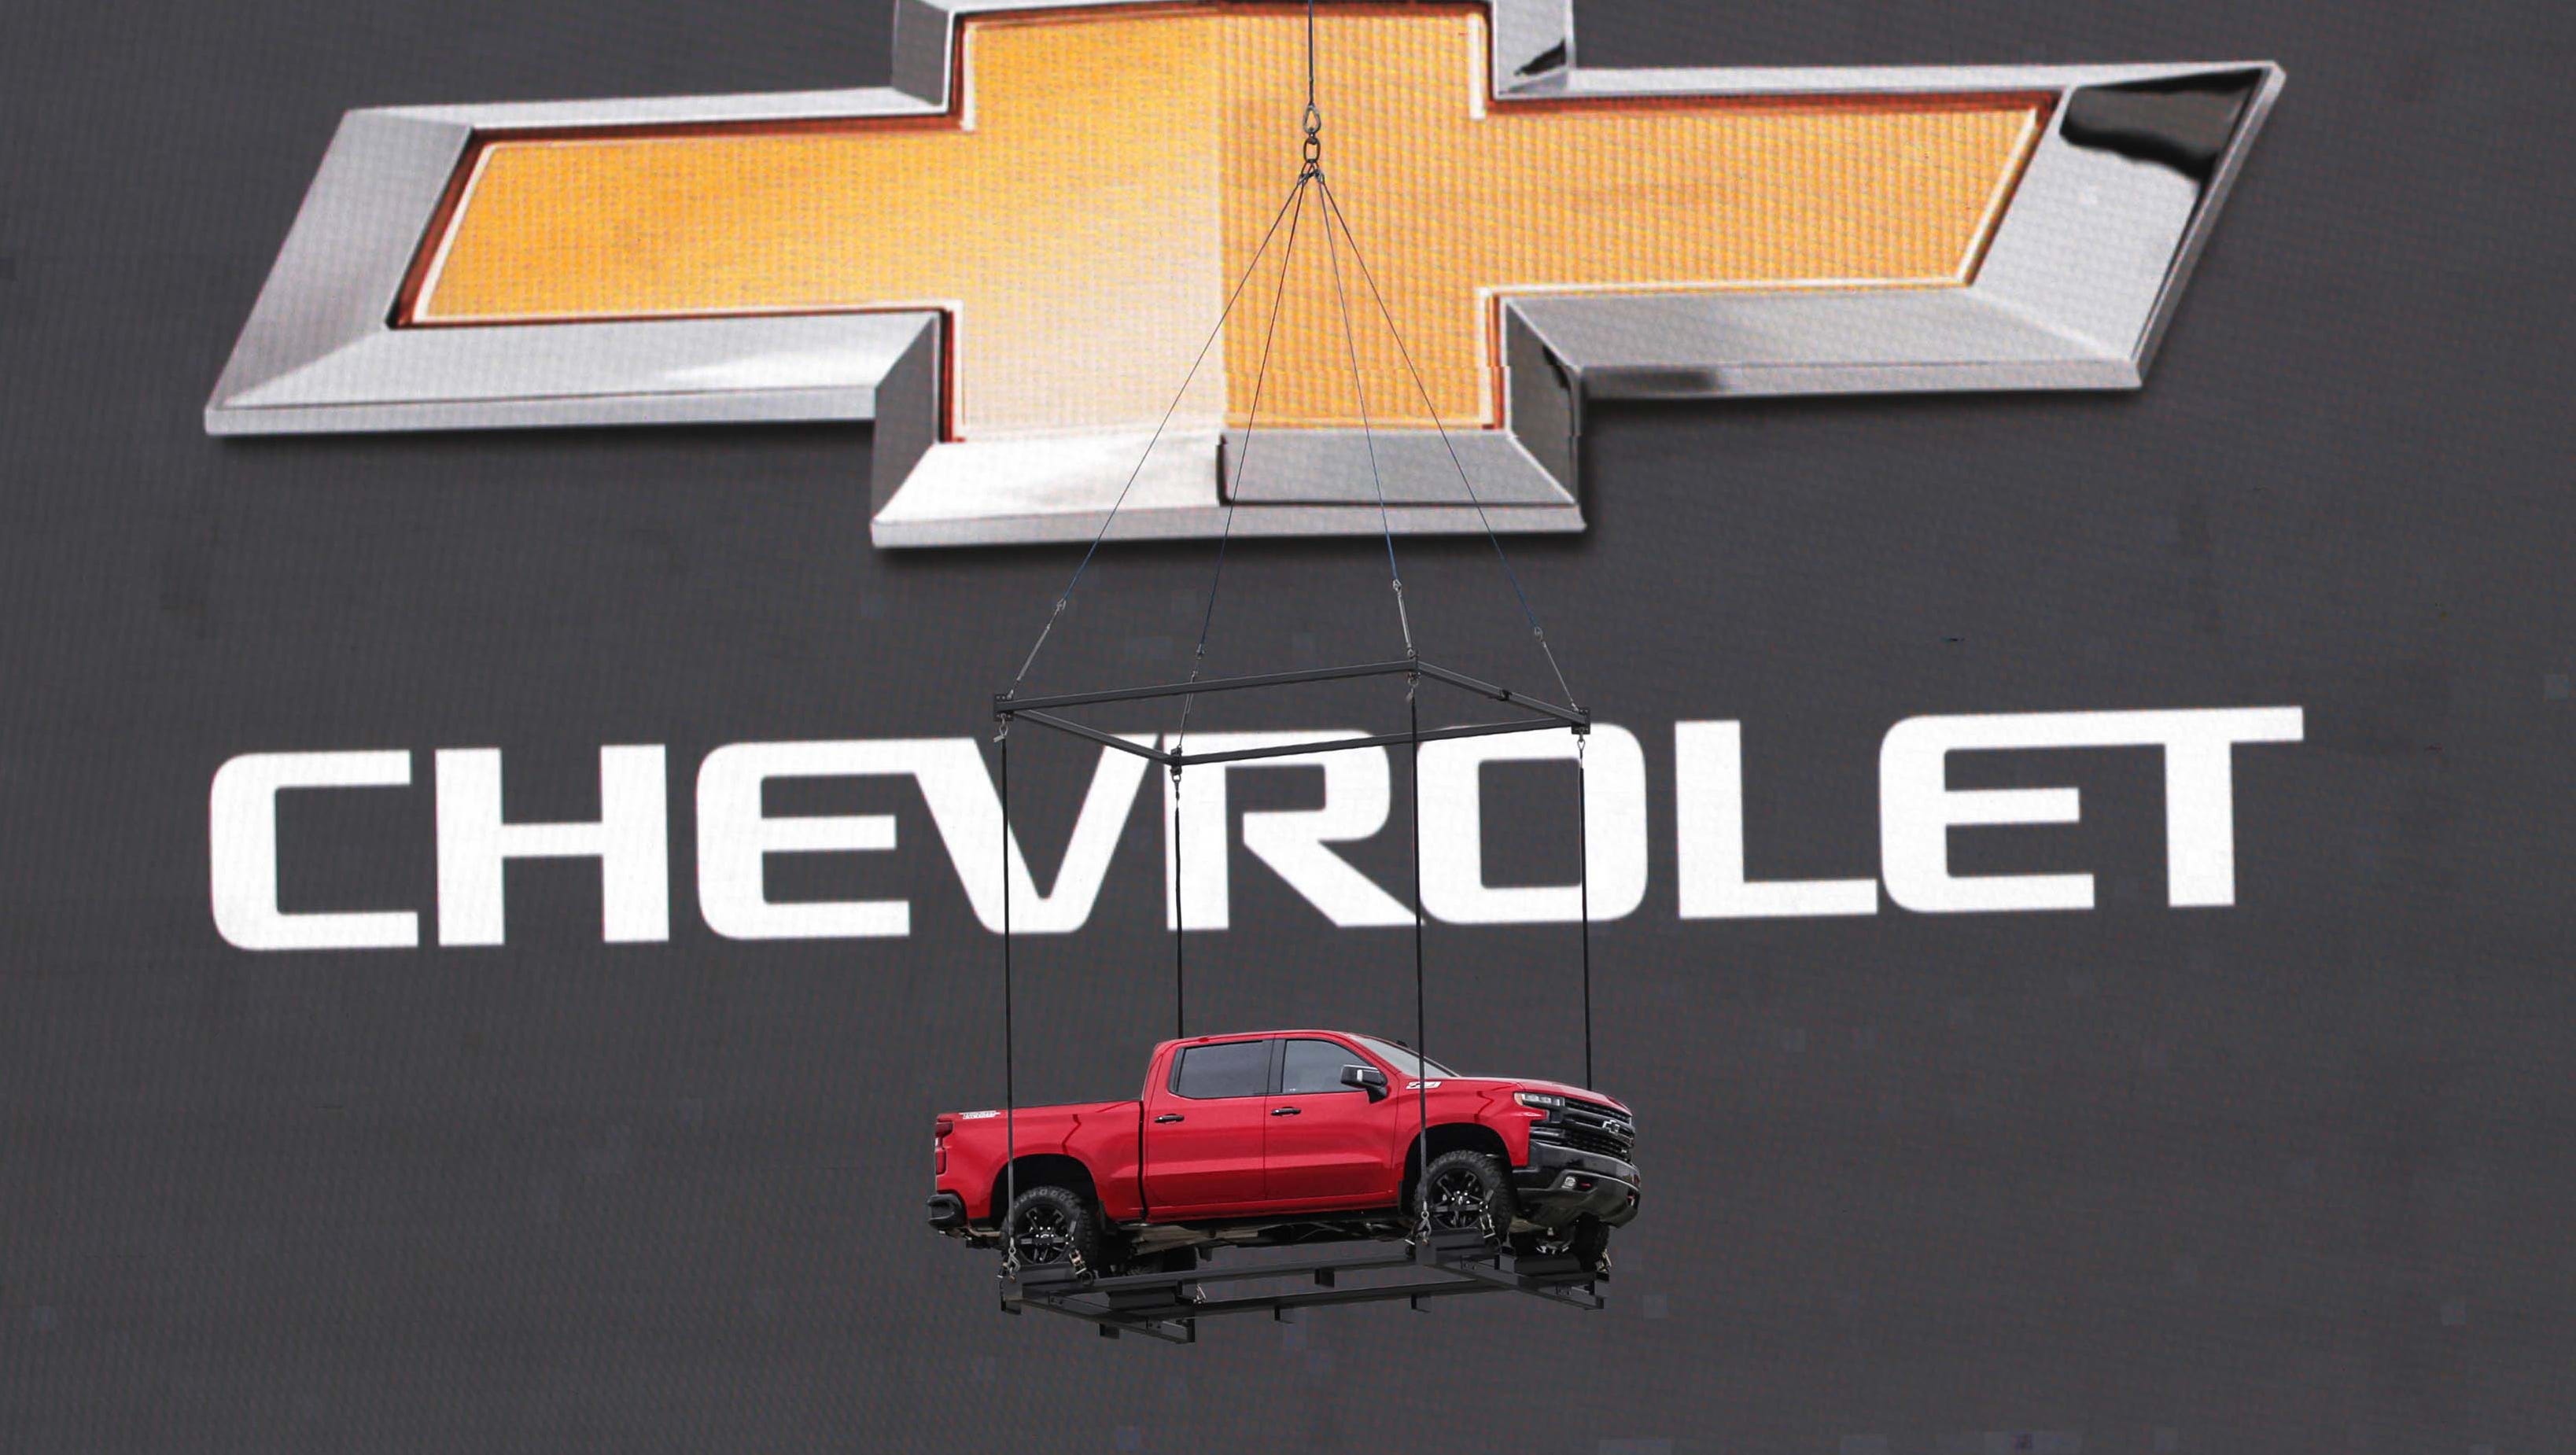 Carried into Texas Motor Speedway by shopper on a harness, the 2019 Cehvy Silverado was dramatically lowered in front of Chevy's logo to the ground.